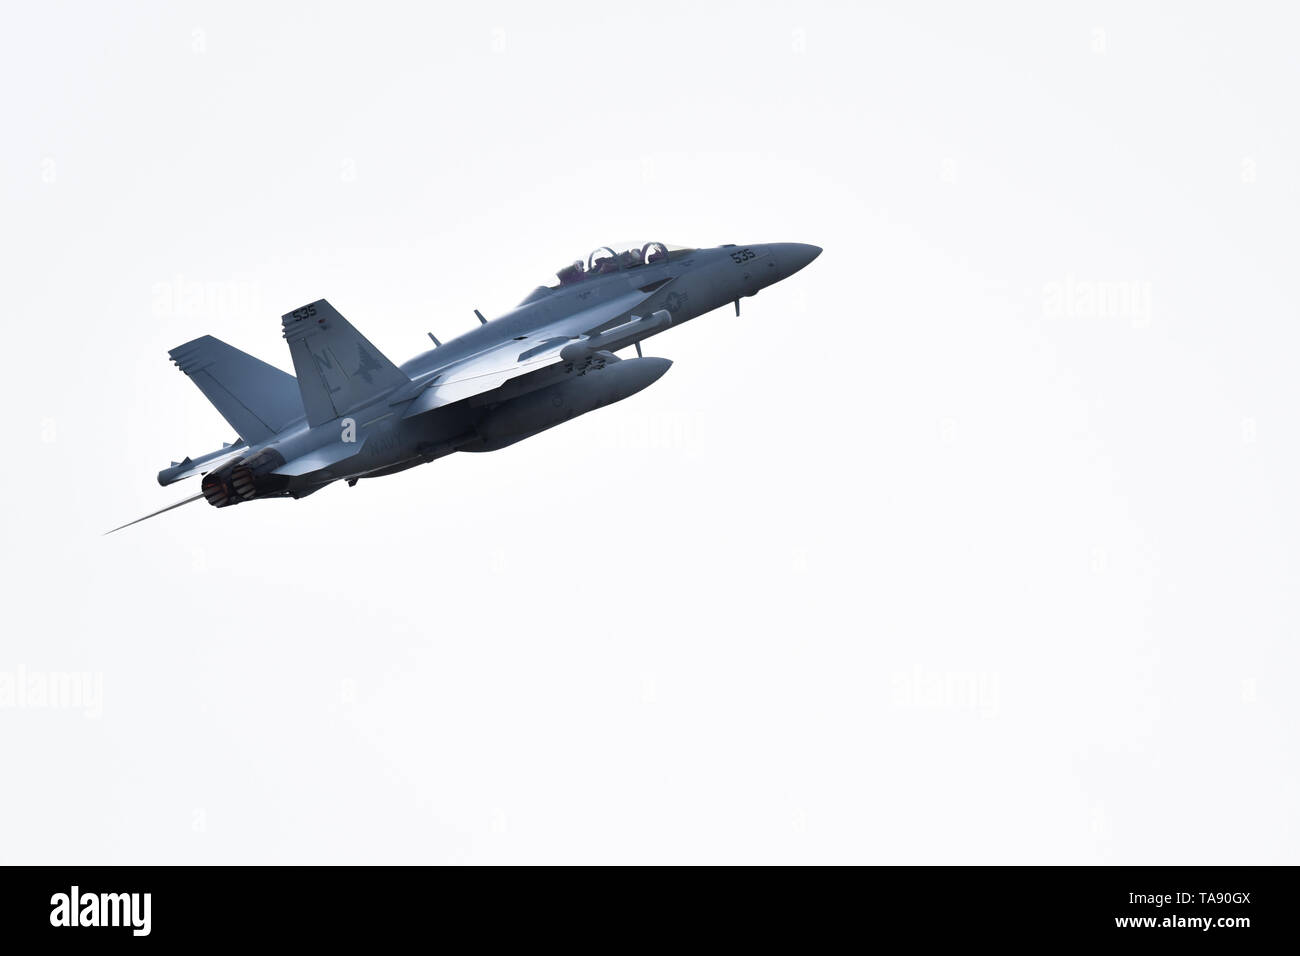 A U.S. Air Force EA-18G Growler assigned to VAQ-134 flies during Northern Edge, May 14, 2019, at Eielson Air Force Base, Alaska. Units participating in Northern Edge have access to the Joint Pacific Alaska Range Complex, which is one of the largest training ranges in the world, with approximately 65,000 square miles of available airspace; 2,500 square miles of land and 42,000 square nautical miles of surface, subsurfaces and overlying airspace. (U.S. Air Force photo by Senior Airman Eric M. Fisher) Stock Photo